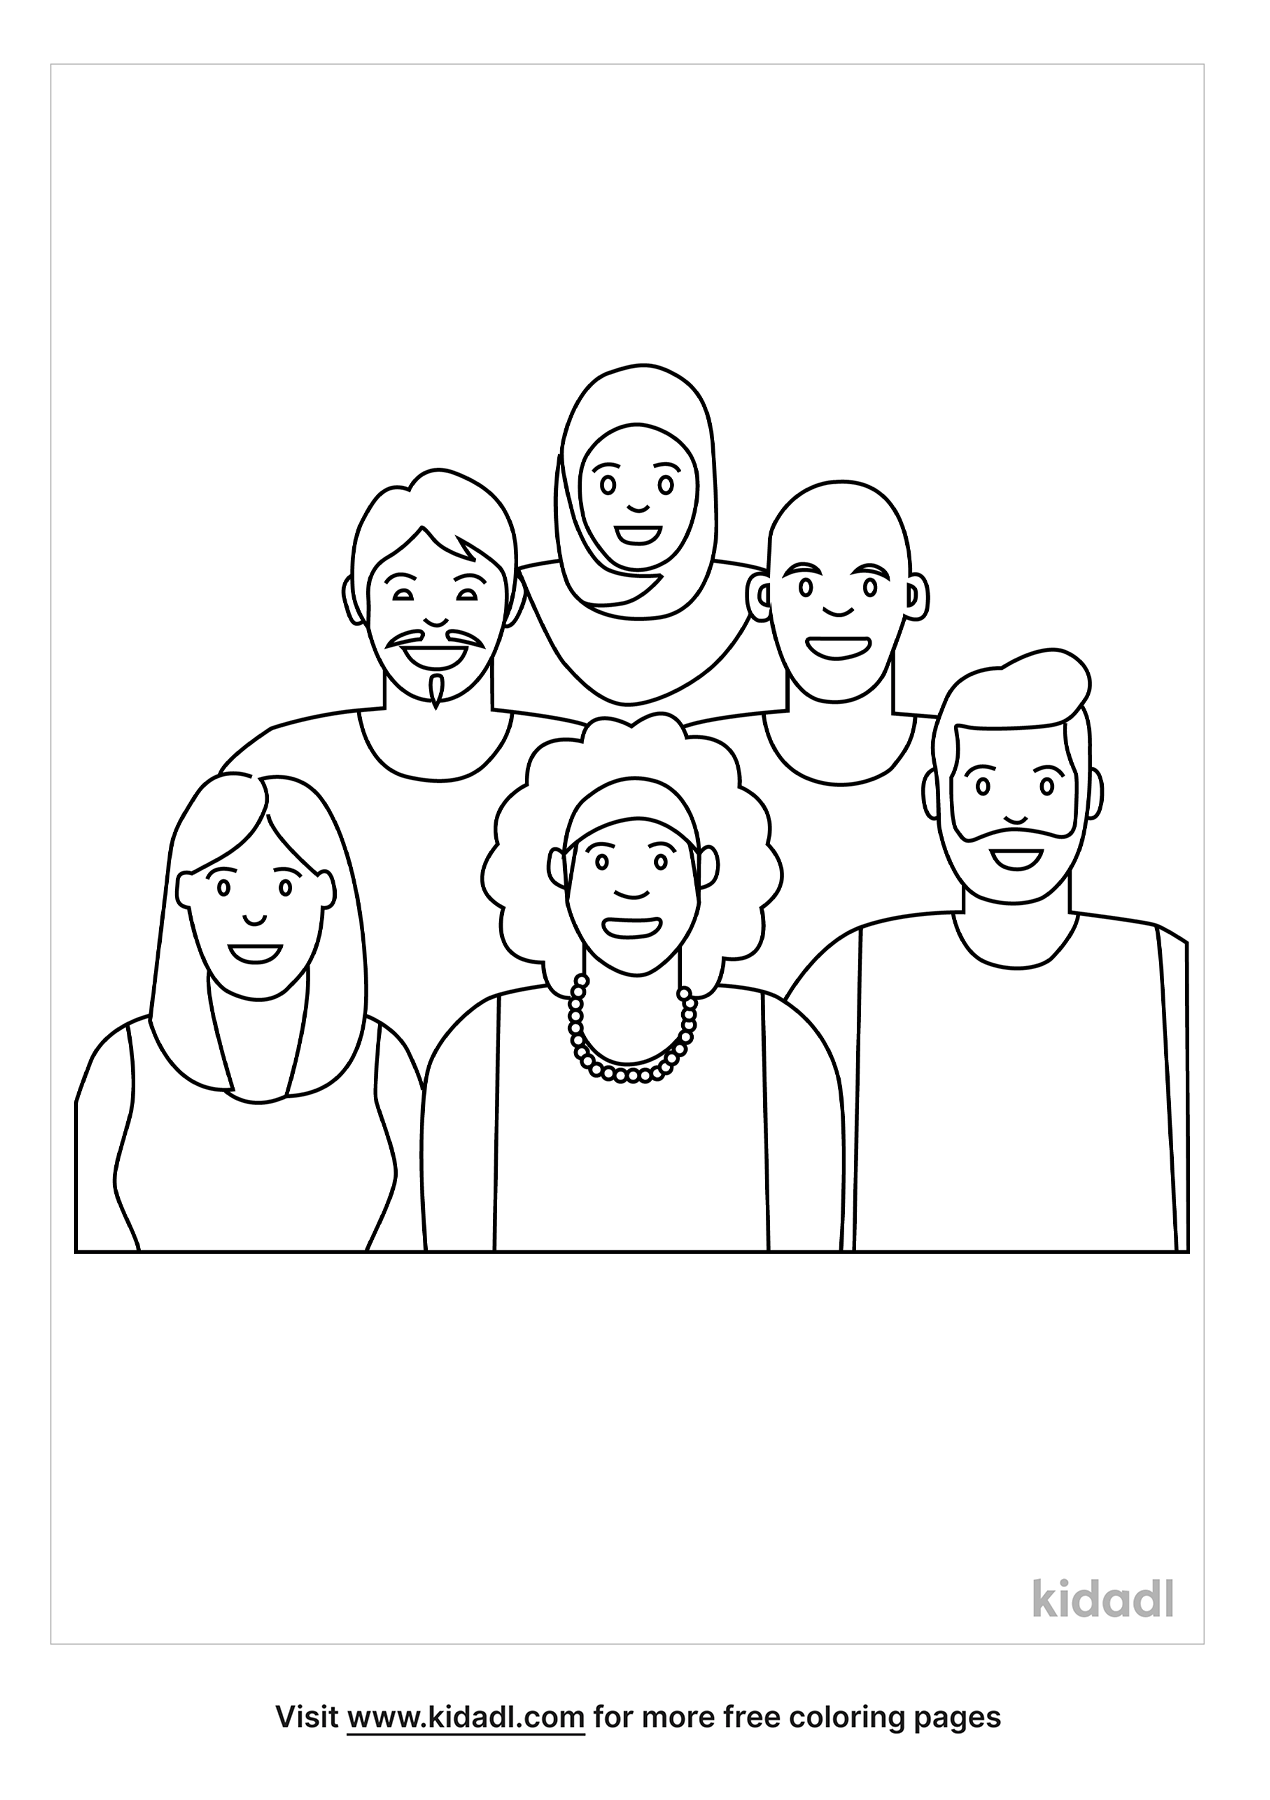 Diversity Coloring Pages | Free People Coloring Pages | Kidadl